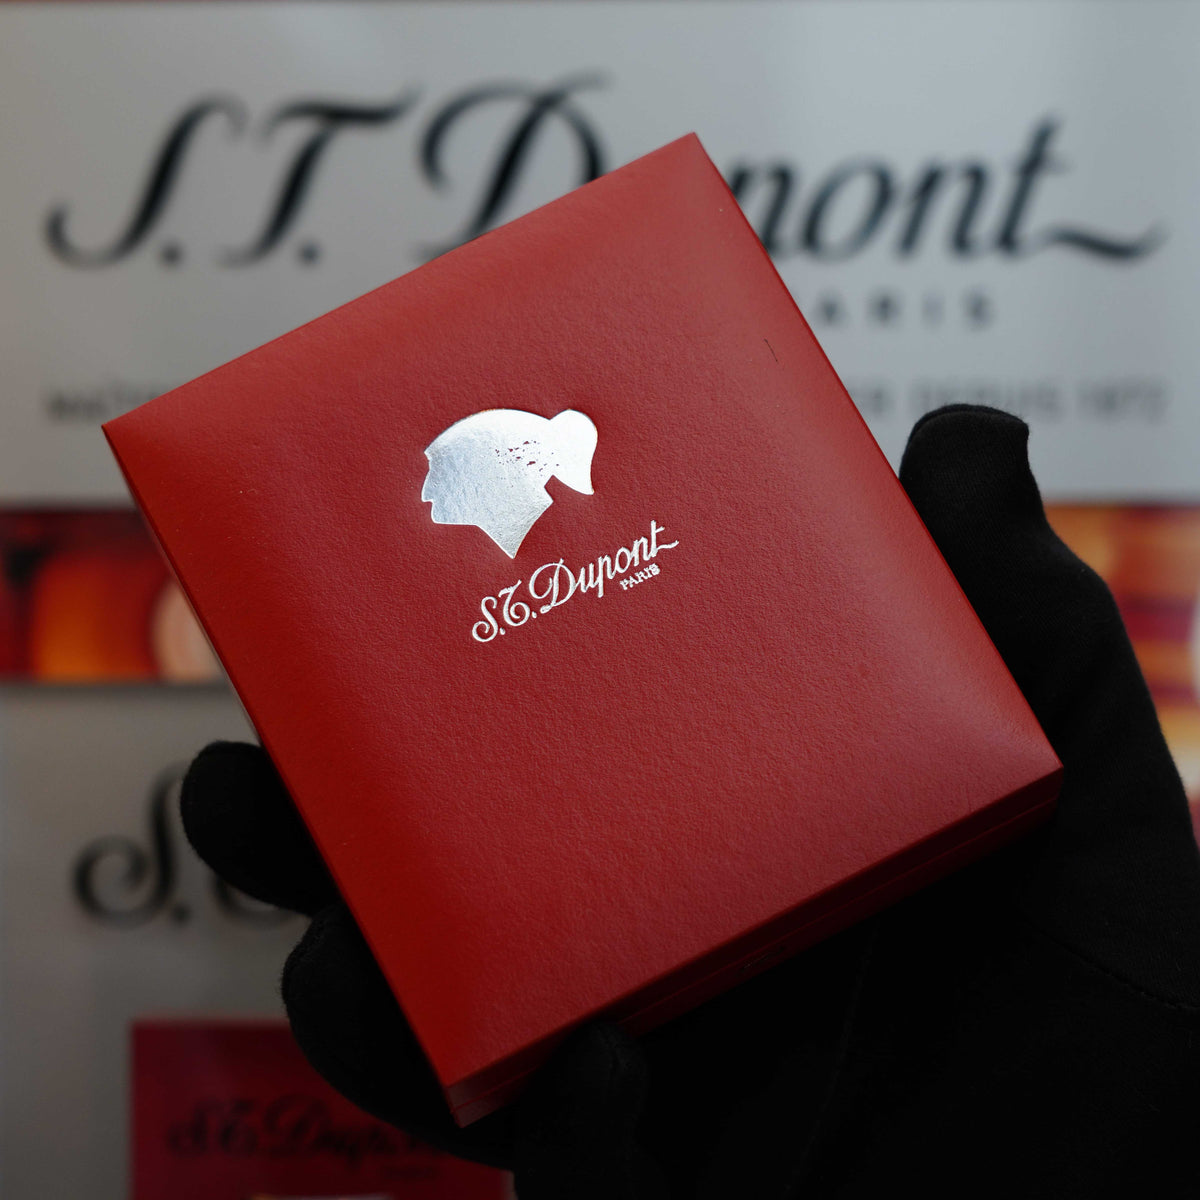 A gloved hand holds a red box featuring a silhouette and the logo "S.T. Dupont," revealing the timeless elegance of a Vintage 1992 rare St Dupont Cohiba First Edition Dual Flame Gatsby 24k Gold finish natural Lacquer lighter.